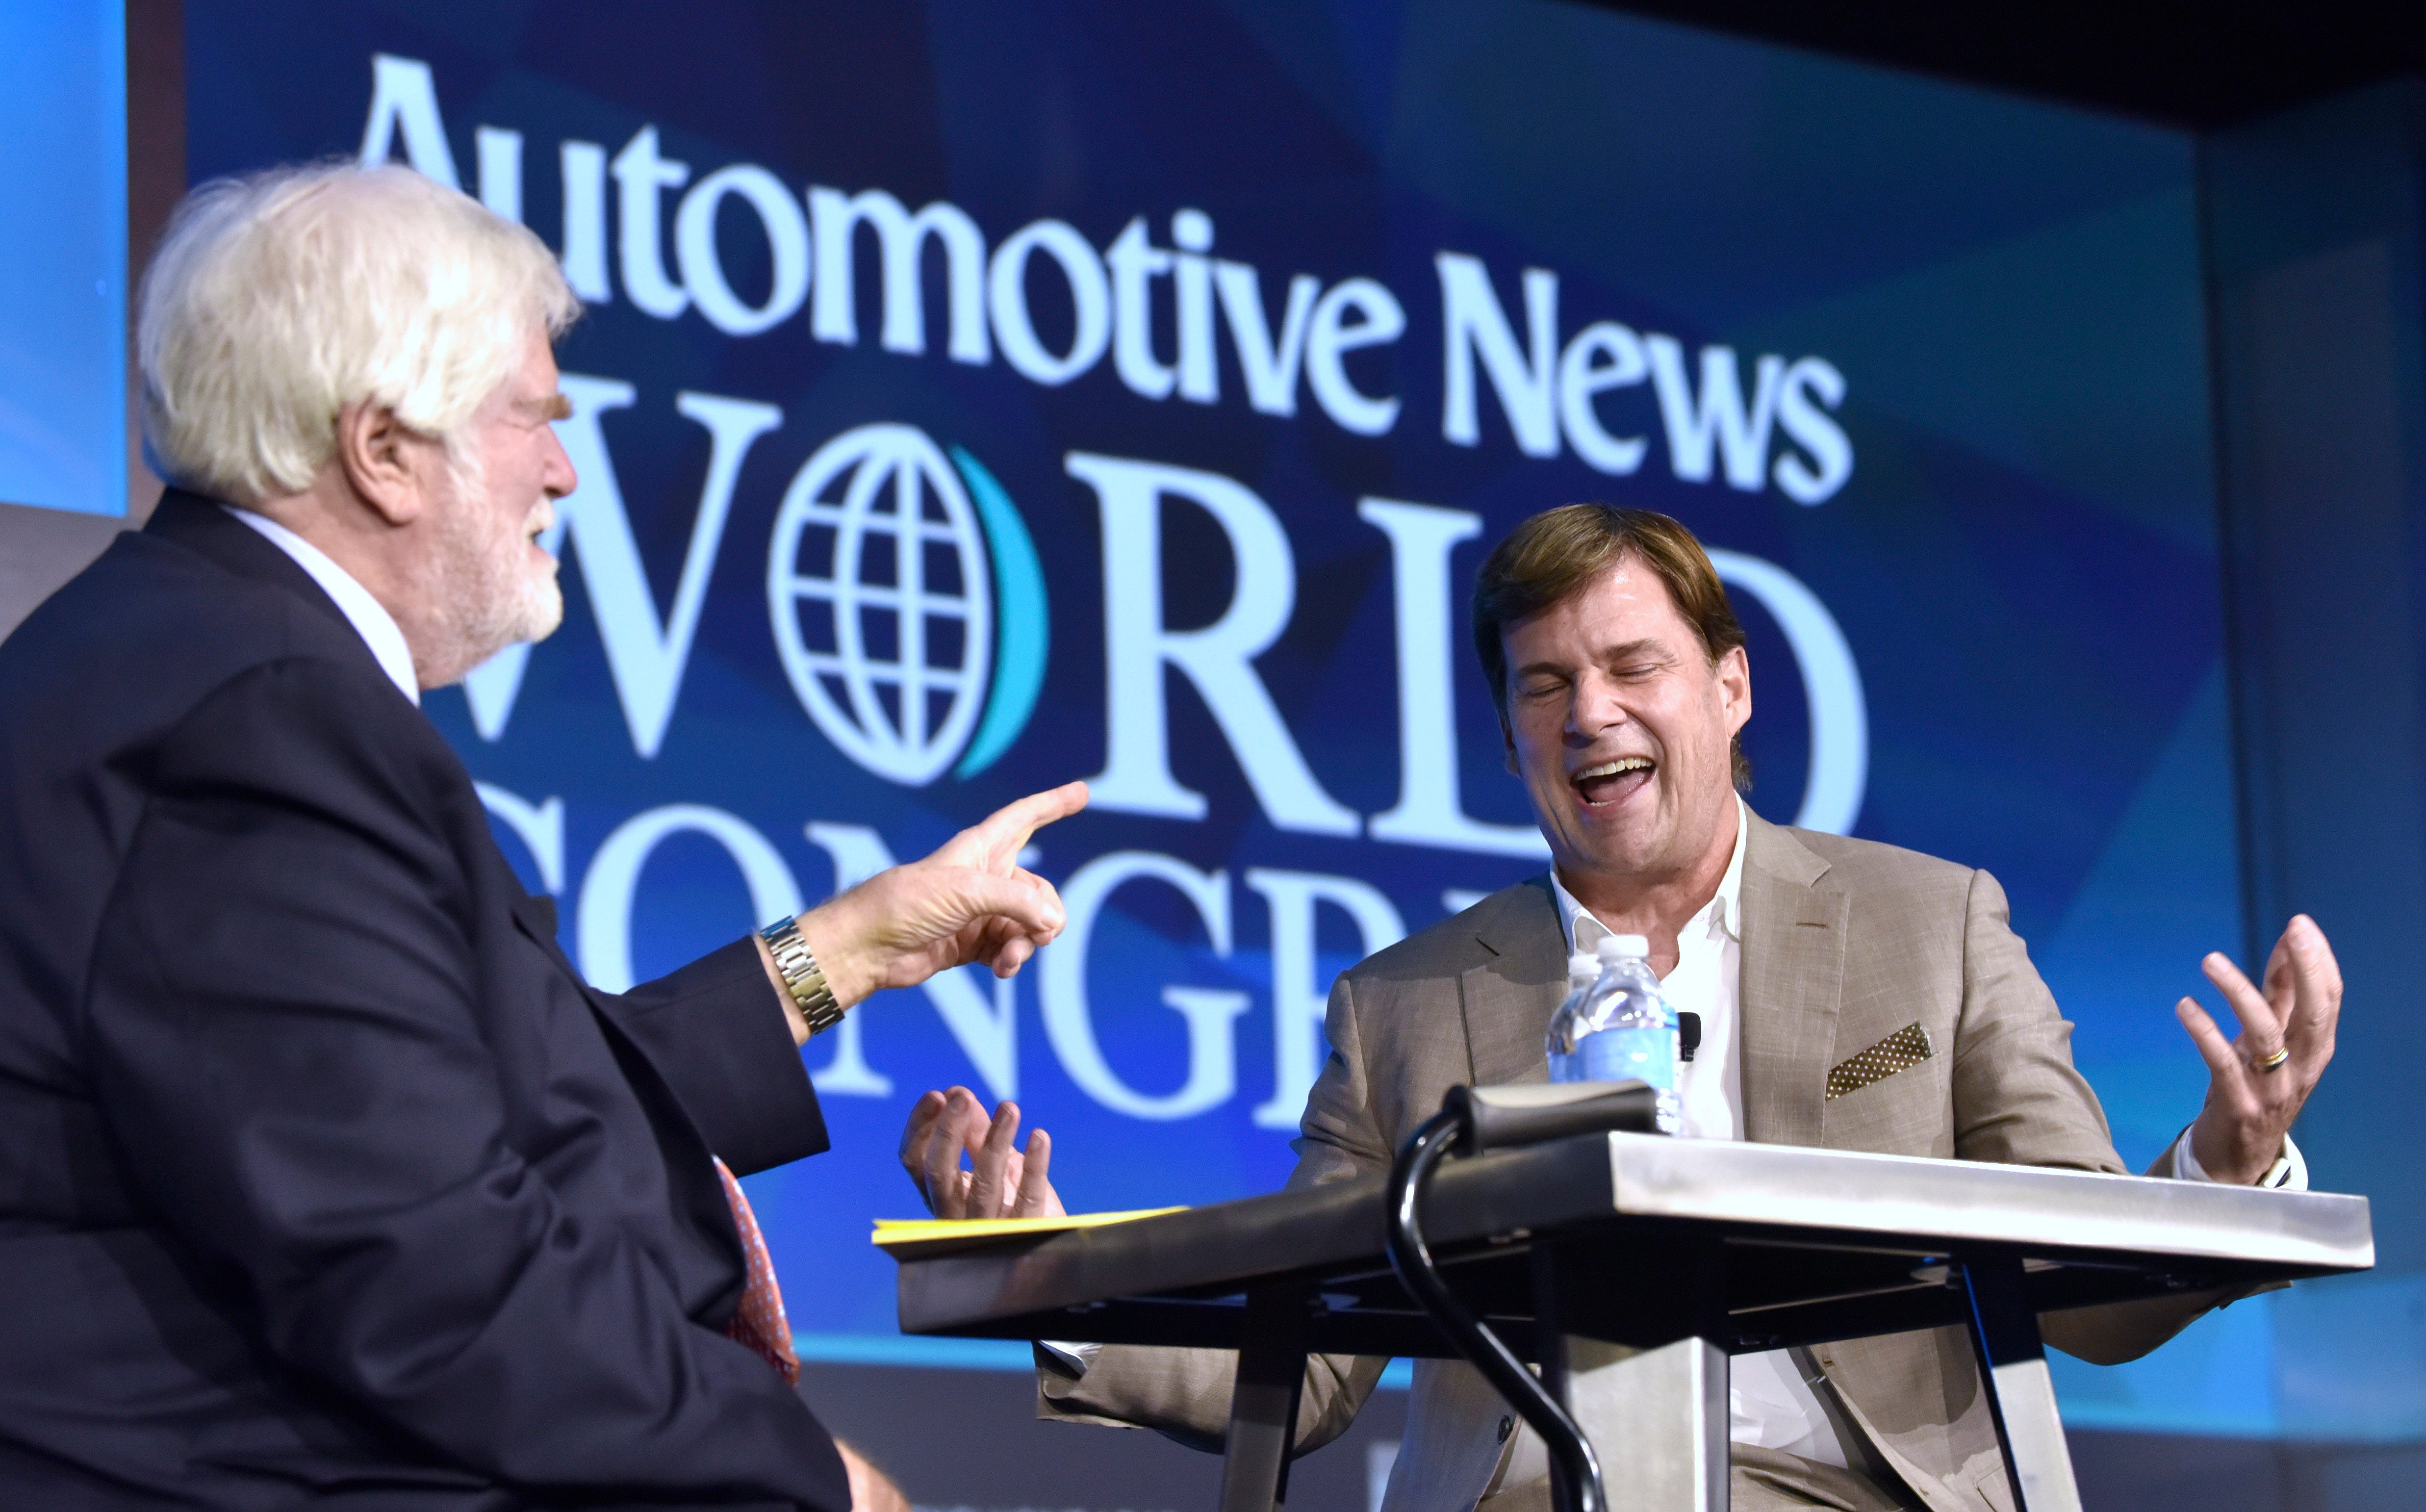 Crain Communications, Inc. Chairman and Automotive News Editor-in-Chief Keith Crain, left, interviews Jim Farley, president global markets, at Ford Motor Company, on stage during the NAIAS Automotive News World Congress in the Renaissance Ballroom on Tuesday.